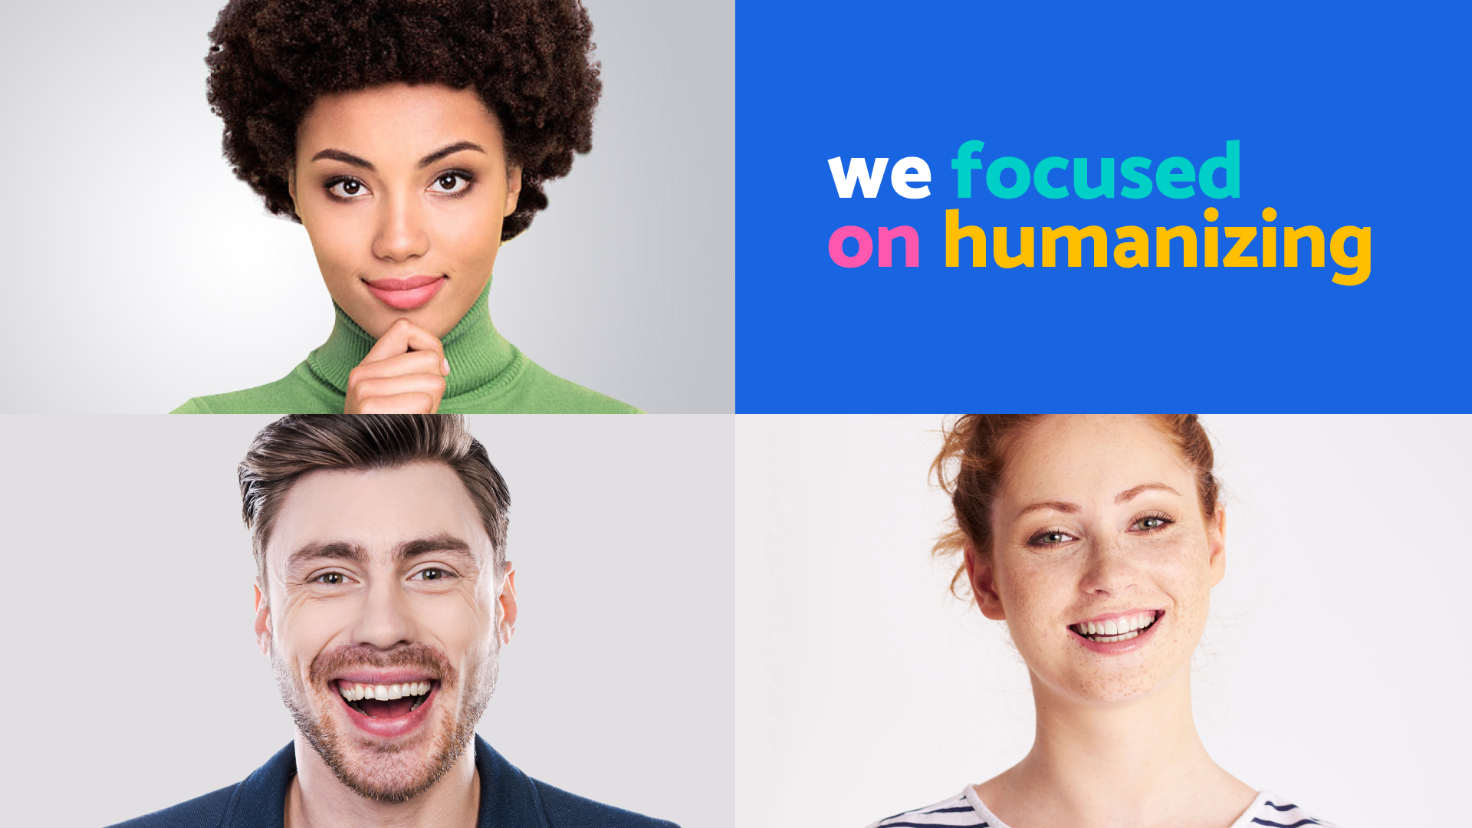 "we focused on humanizing" text over a collage of headshots